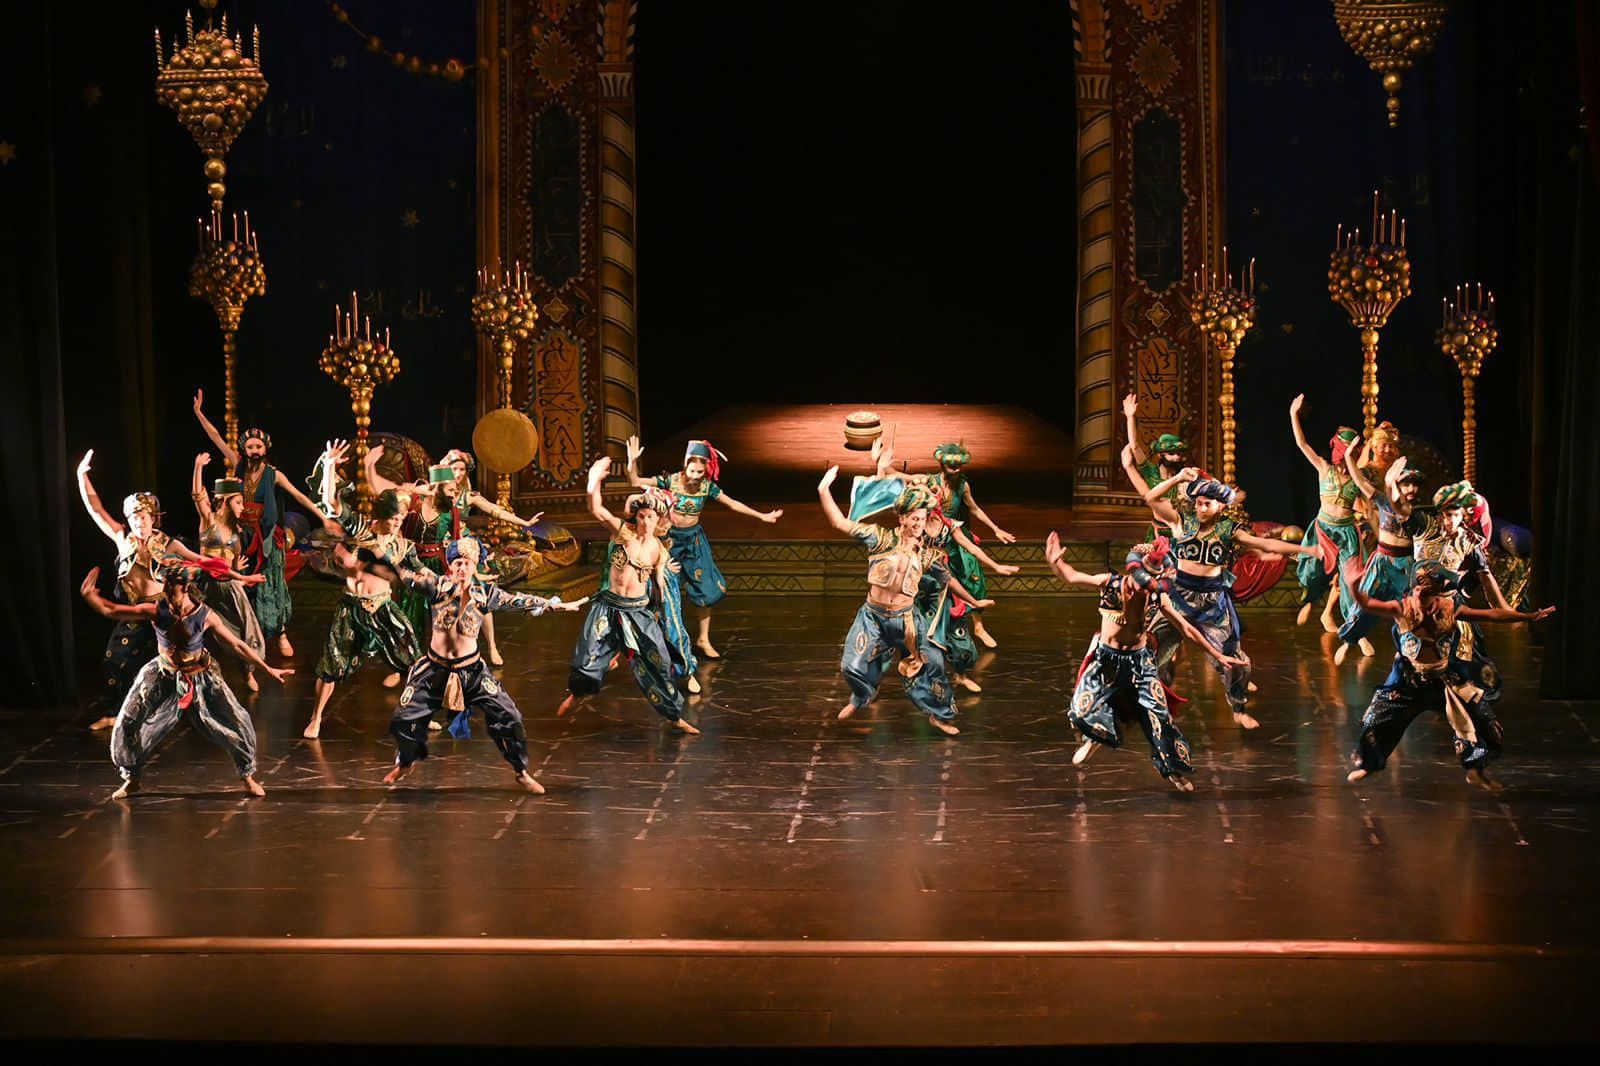 Bulgaria stages Fikrat Amirov's ballet on 30th anniversary of diplomatic ties [PHOTO]